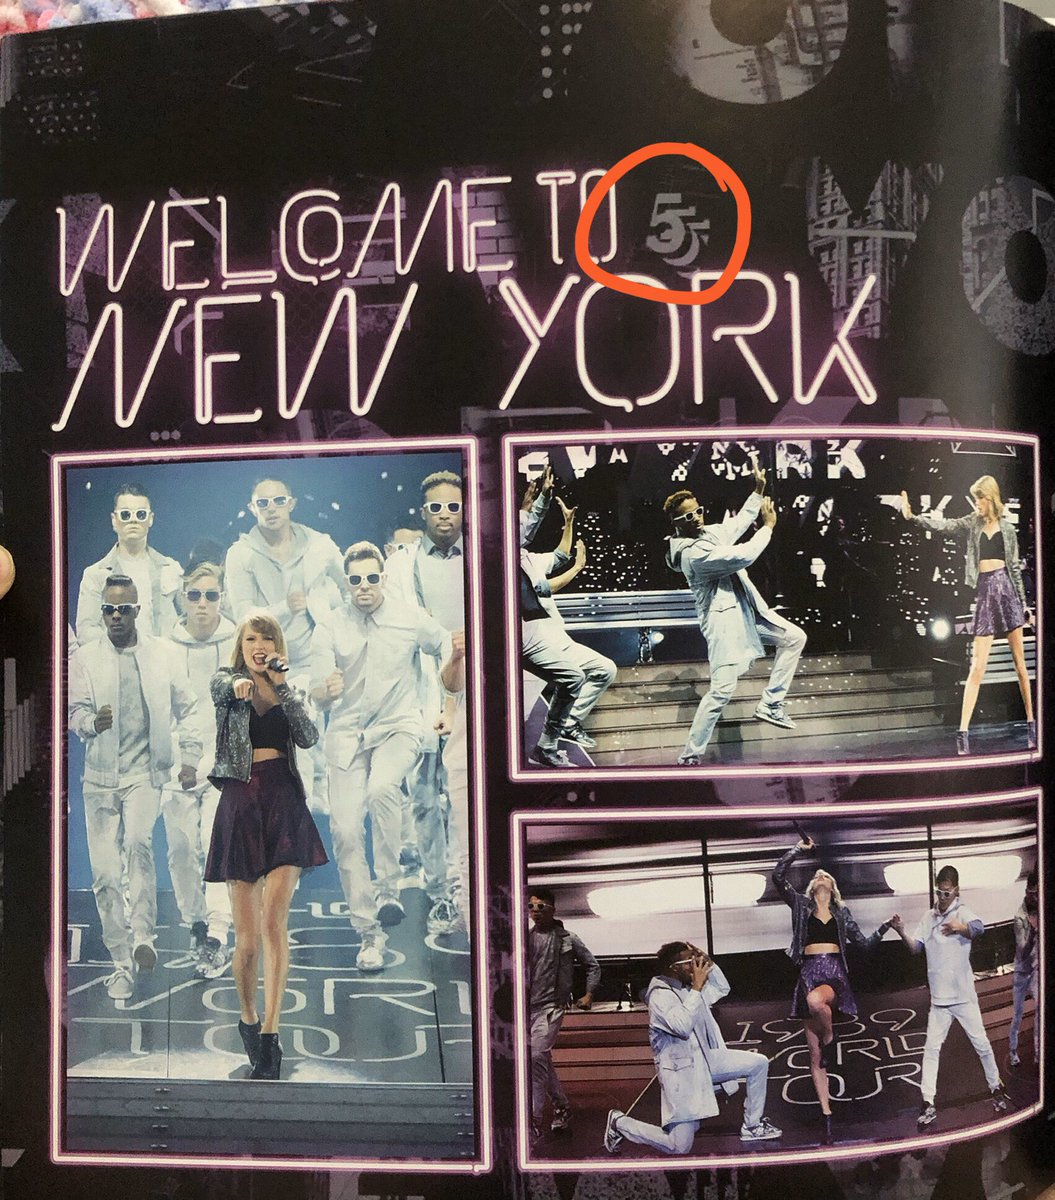 Look I know this is a reach but she’s looking out the window at NYC in The Man, & since 5/22 keeps popping up, I thought I’d mention there’s a 5/22 (and a fence ) in the Welcome To New York tour graphics  @taylornation13  @taylorswift13